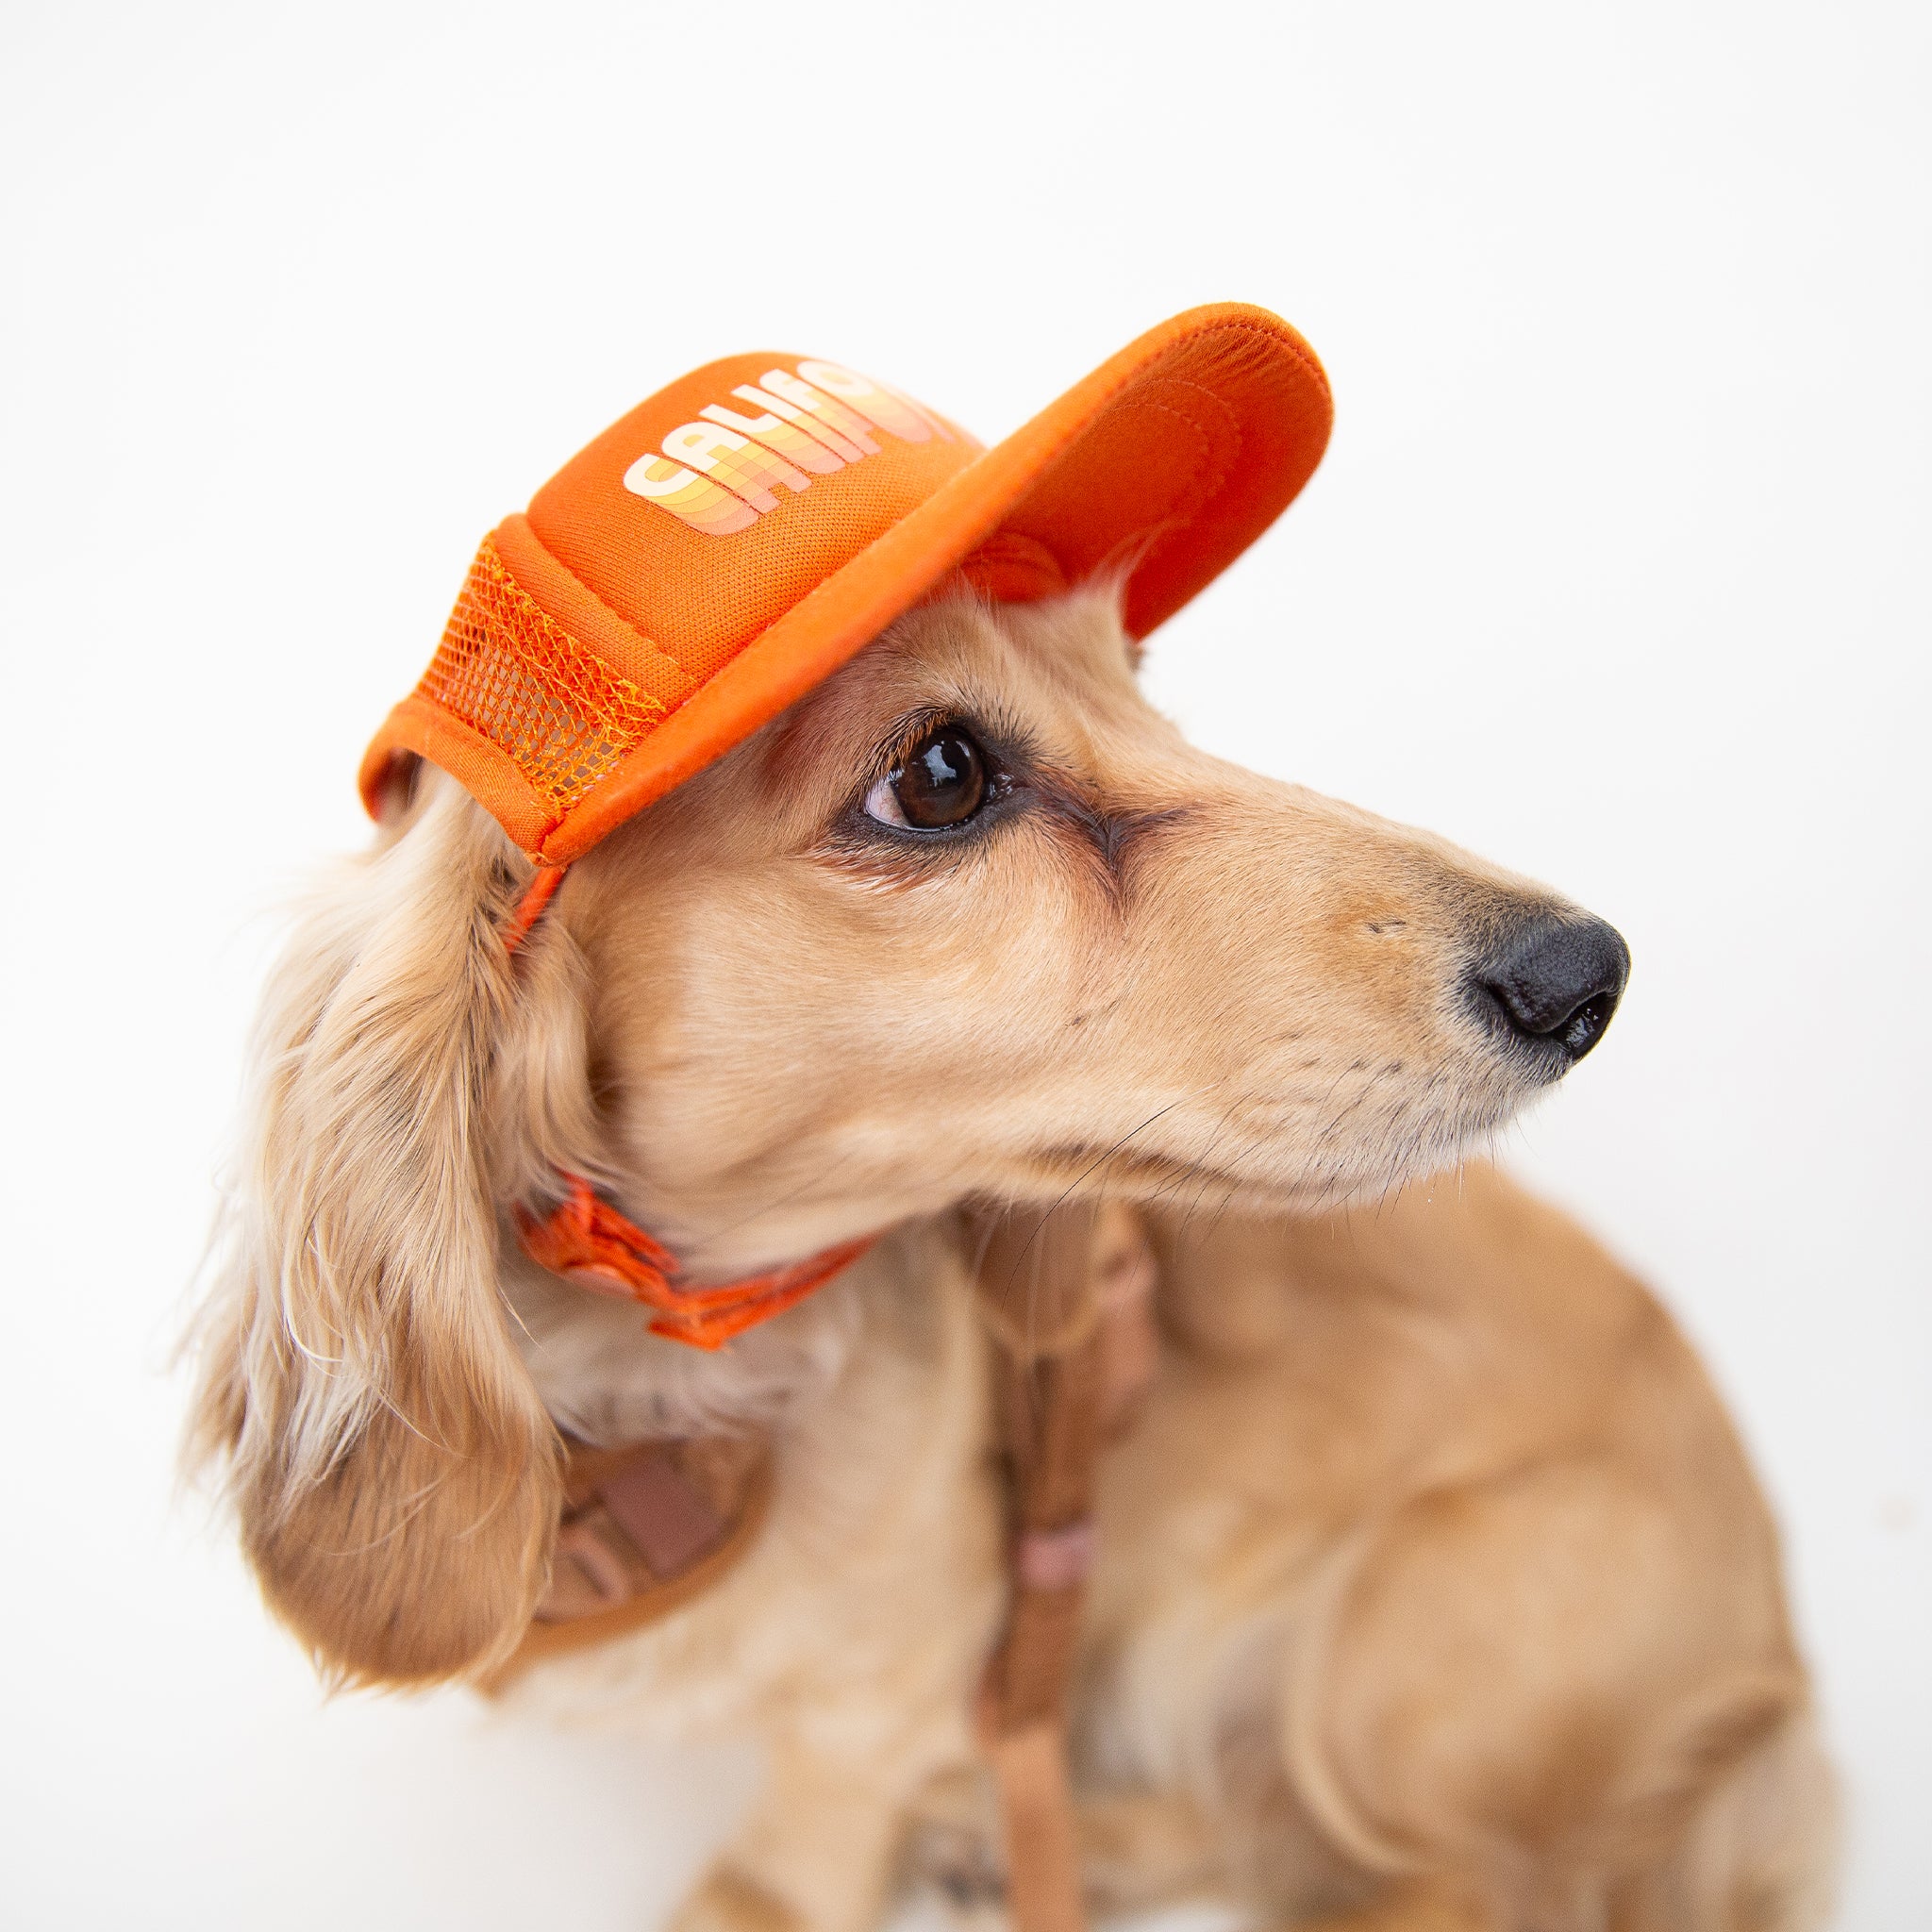 An orange puplid hat with white text that reads, &quot;California&quot;.